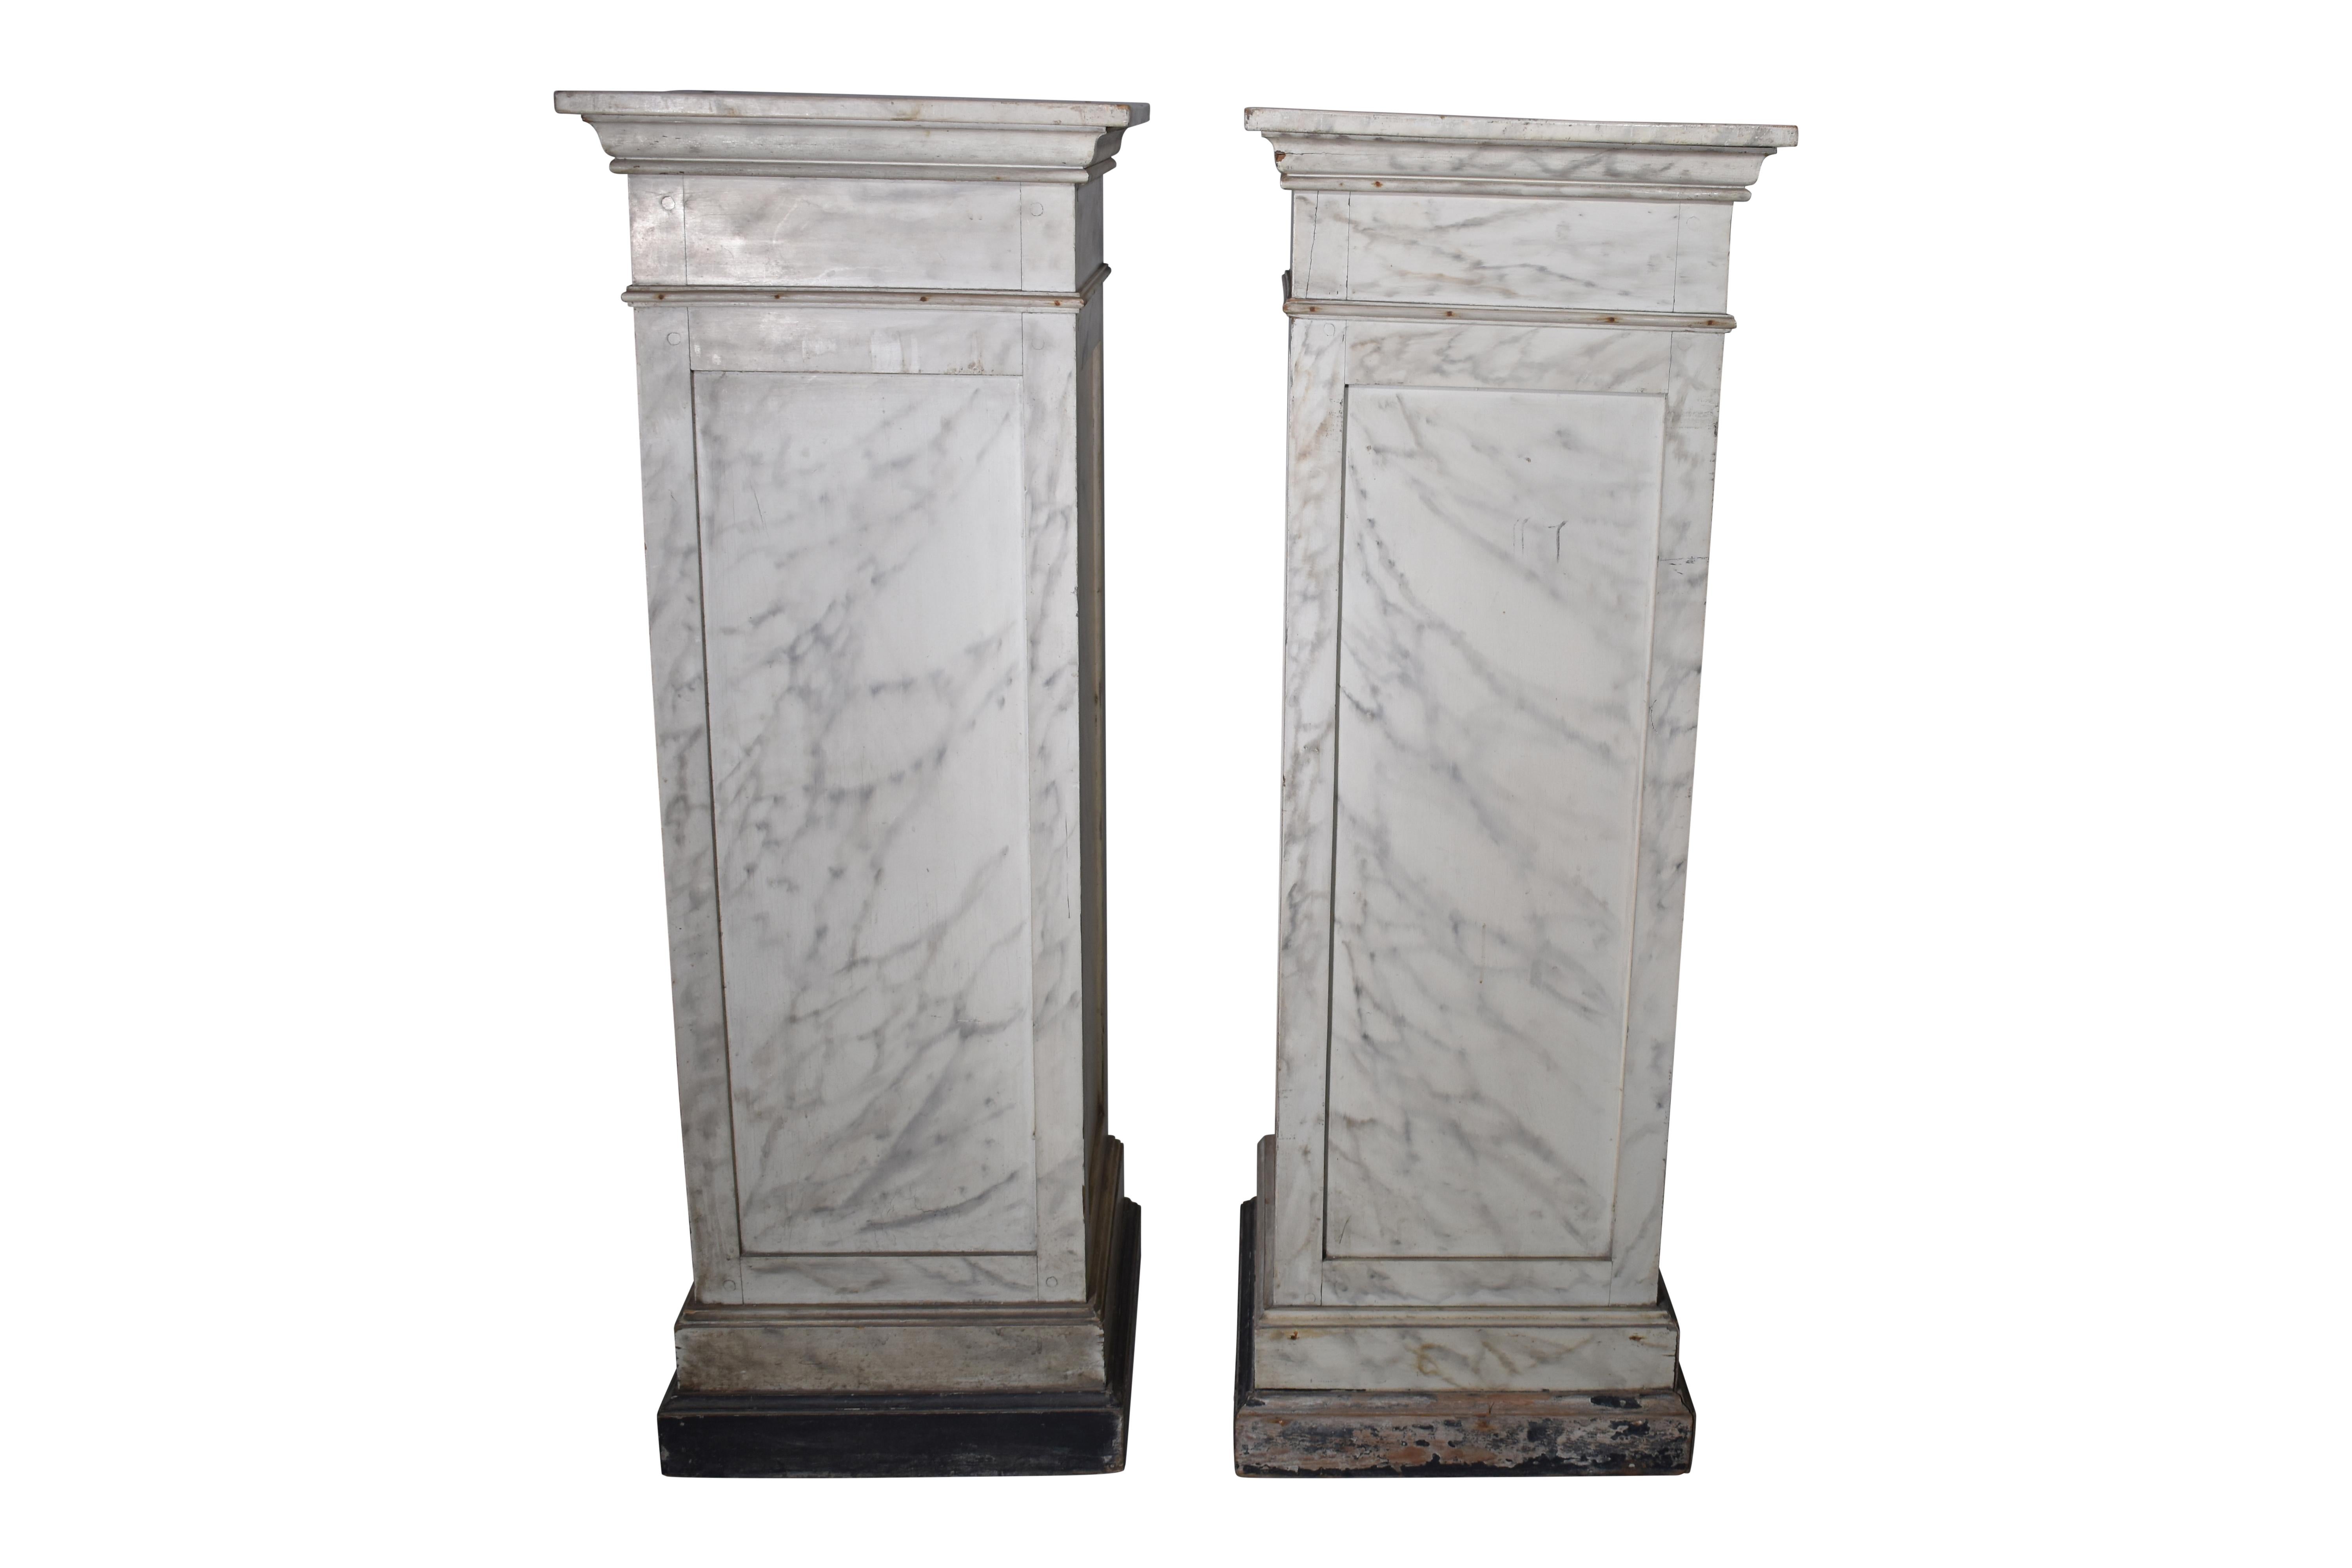 These Swedish vintage planters from Belgium with natural organic patina are striking on the faux marble pedestals. Antique elements that add warmth and European style to your home.